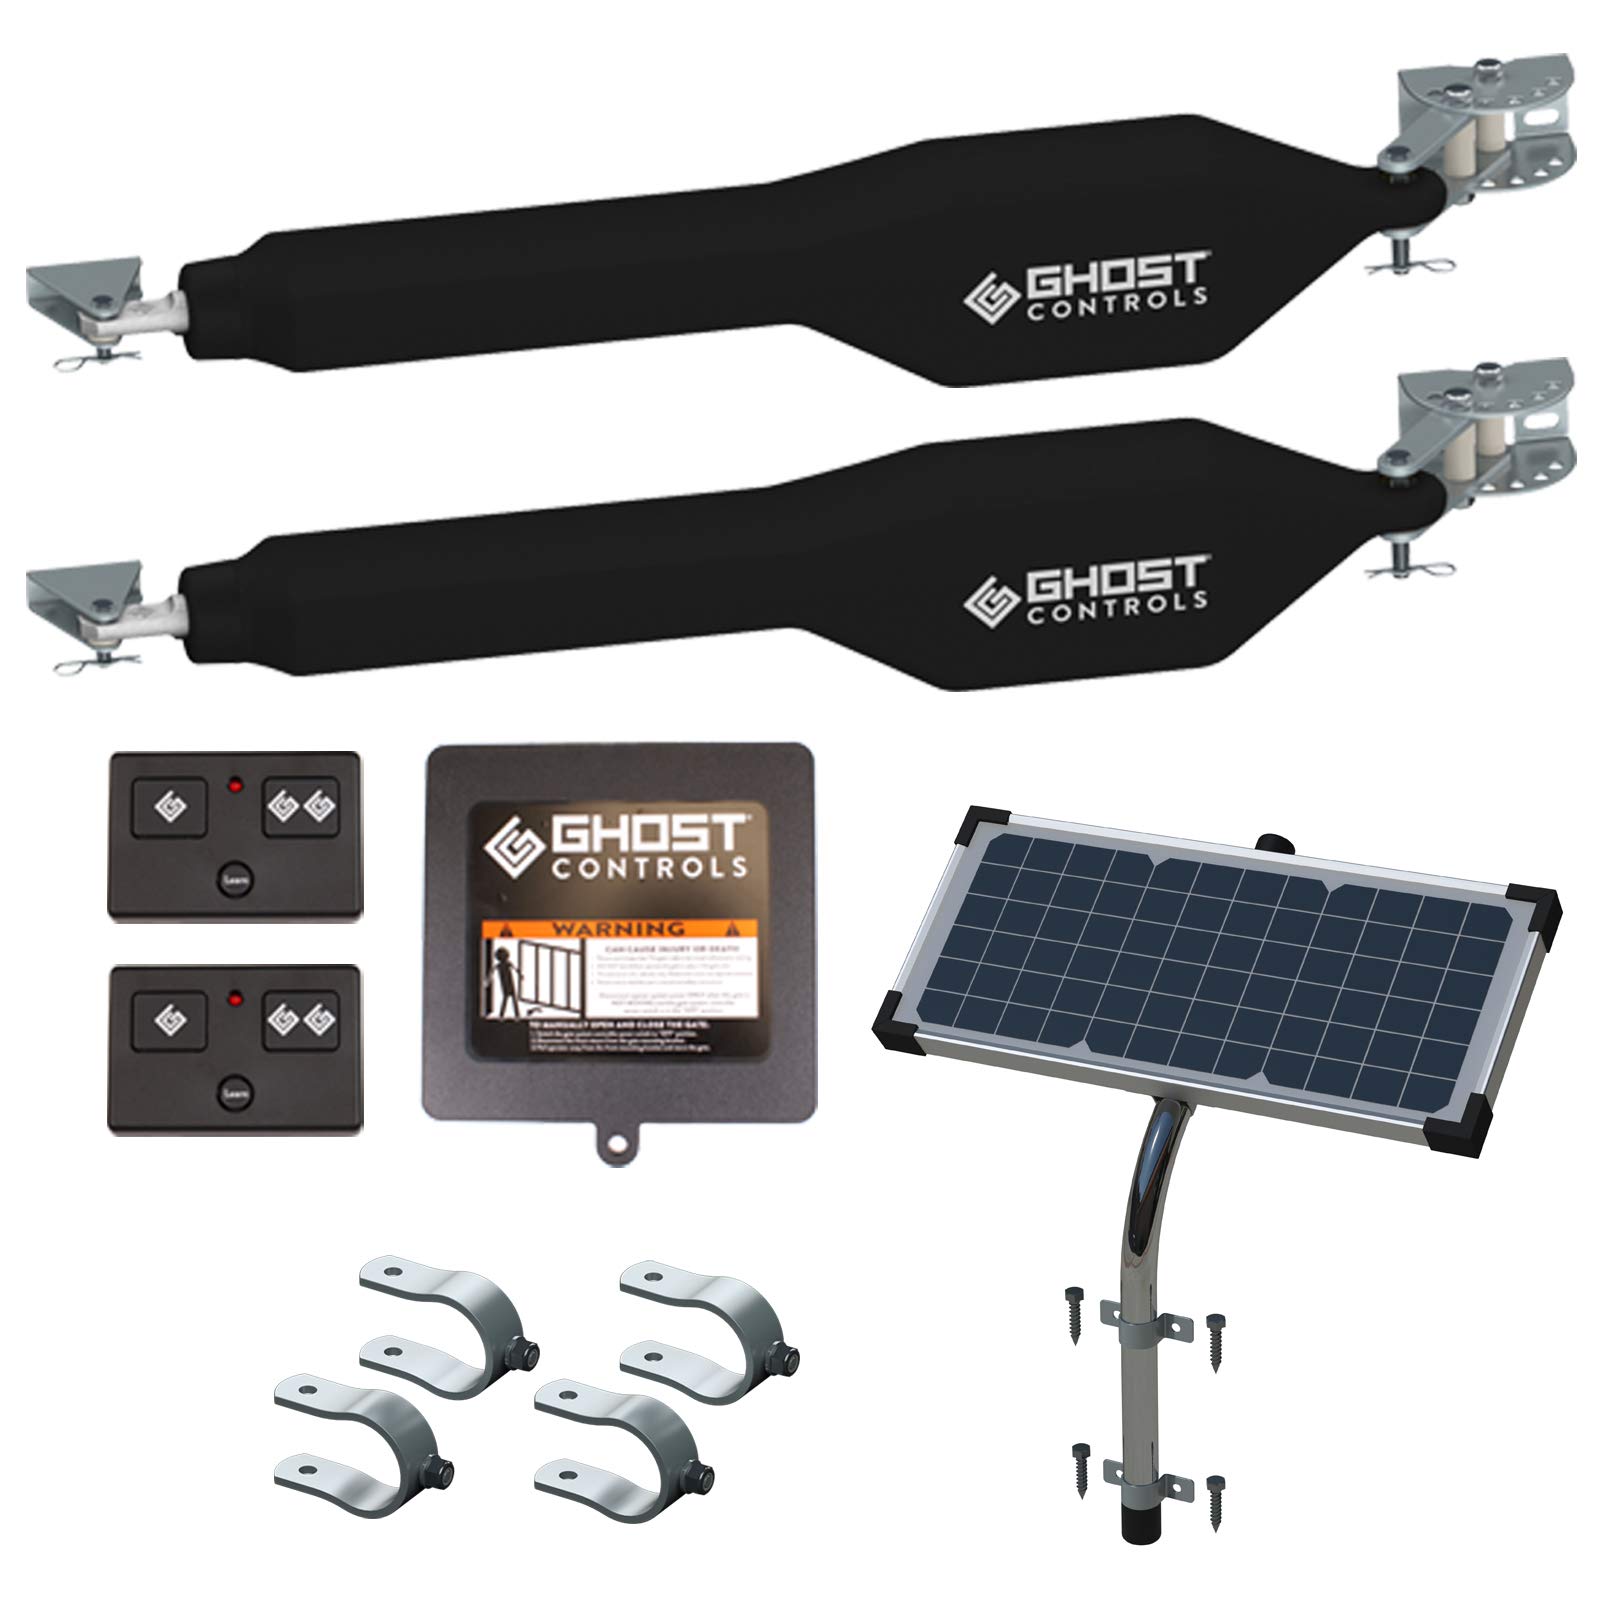 GC Ghost Controls ghost controls Heavy-Duty Solar Automatic gate Opener Kit for Driveway Swing gates with Long-Range Solar gate Opener Remote - Mo